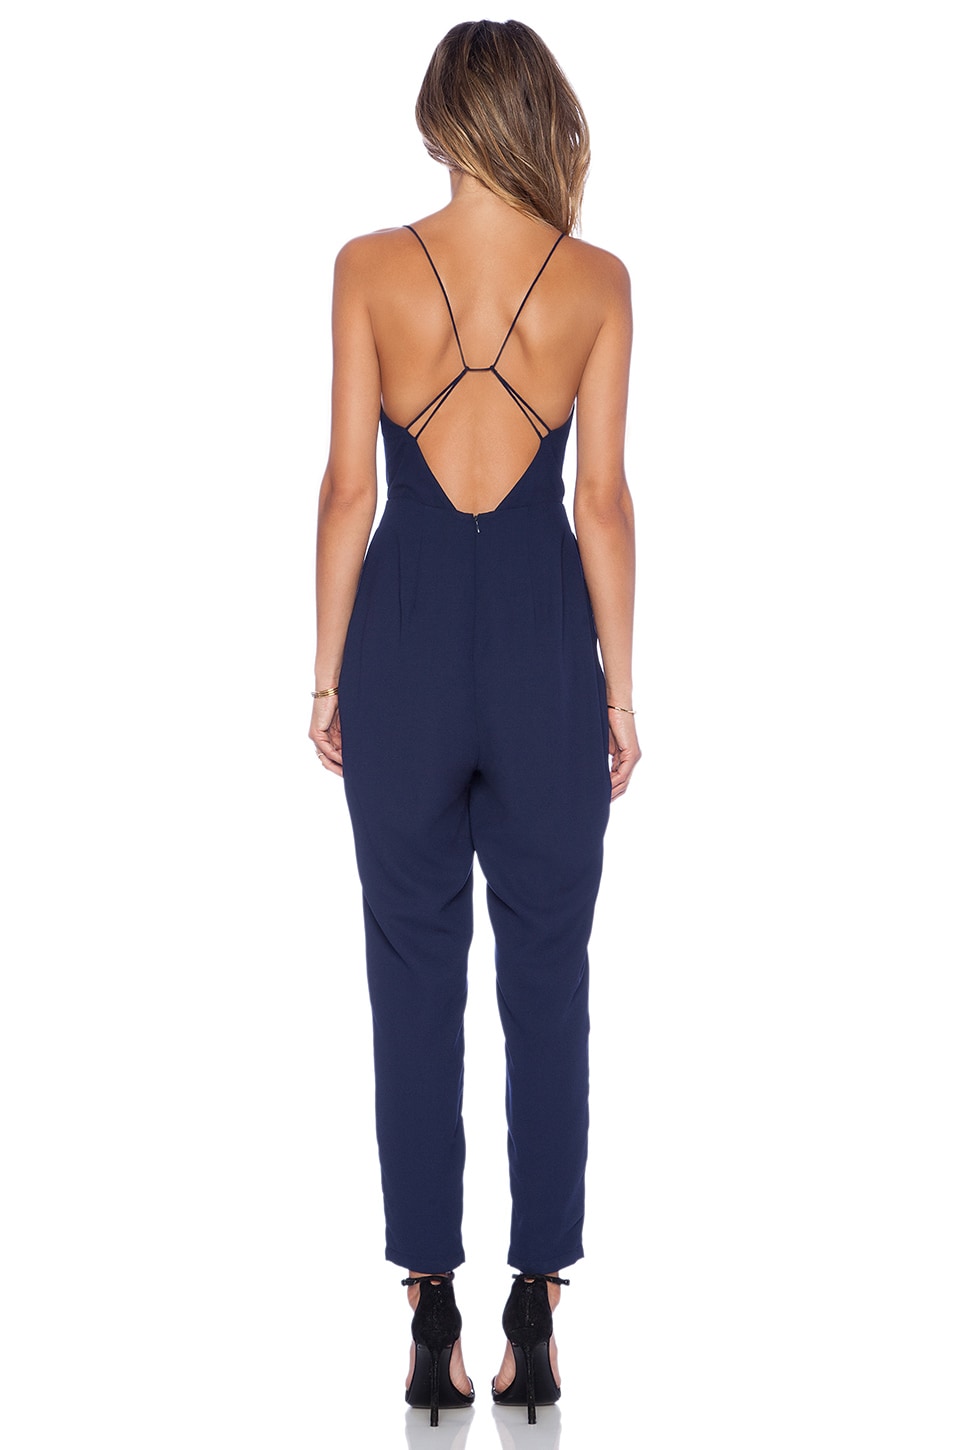 Finders Keepers All Time High Cut Out Back Jumpsuit in Peacoat | REVOLVE